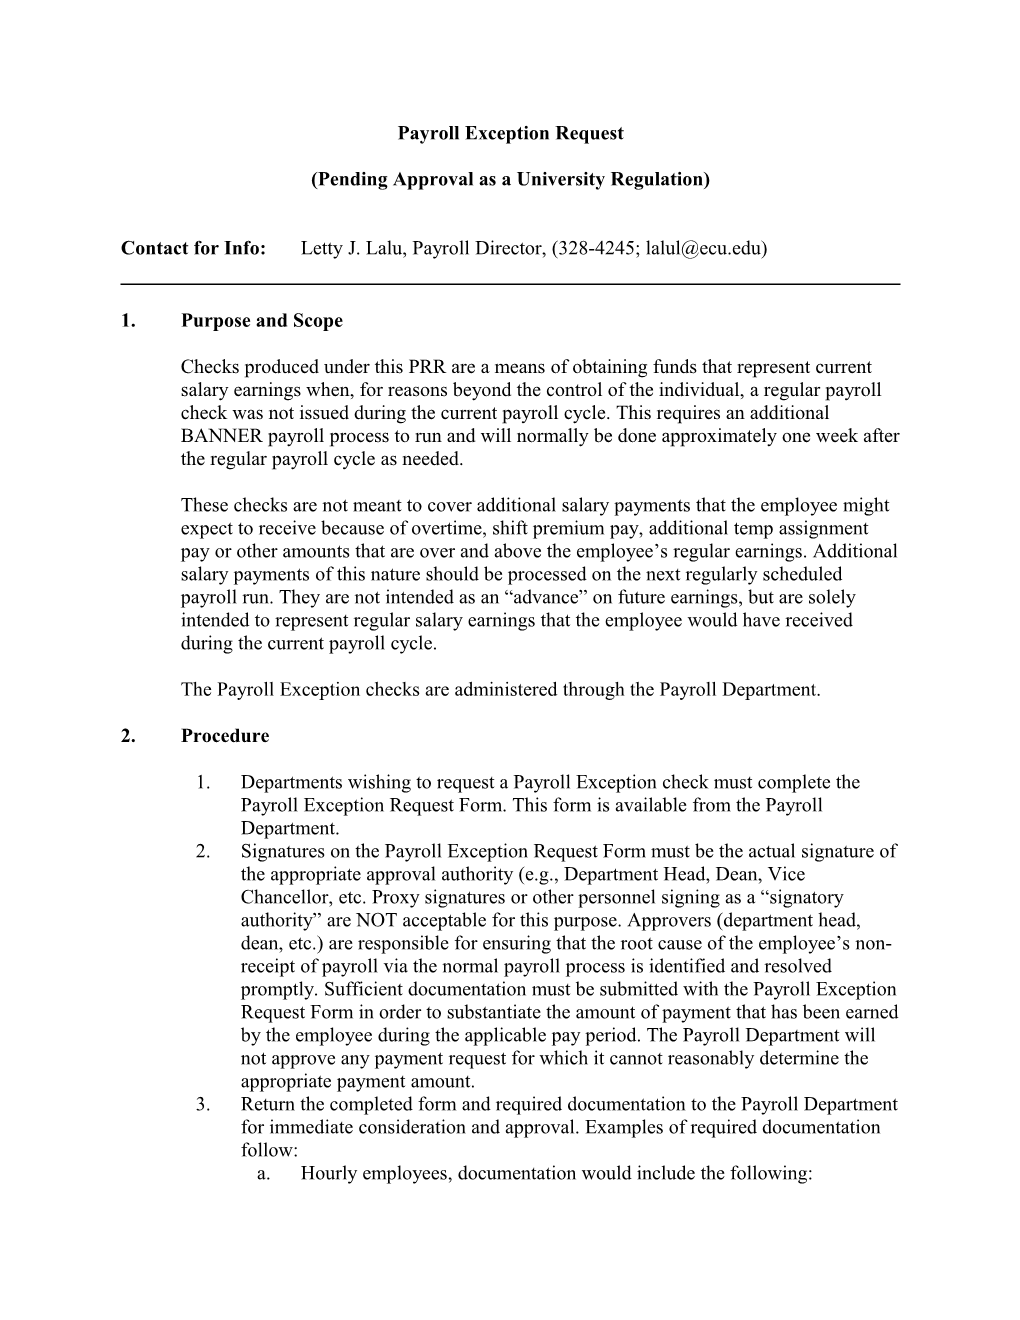 Pending Approval As a University Regulation